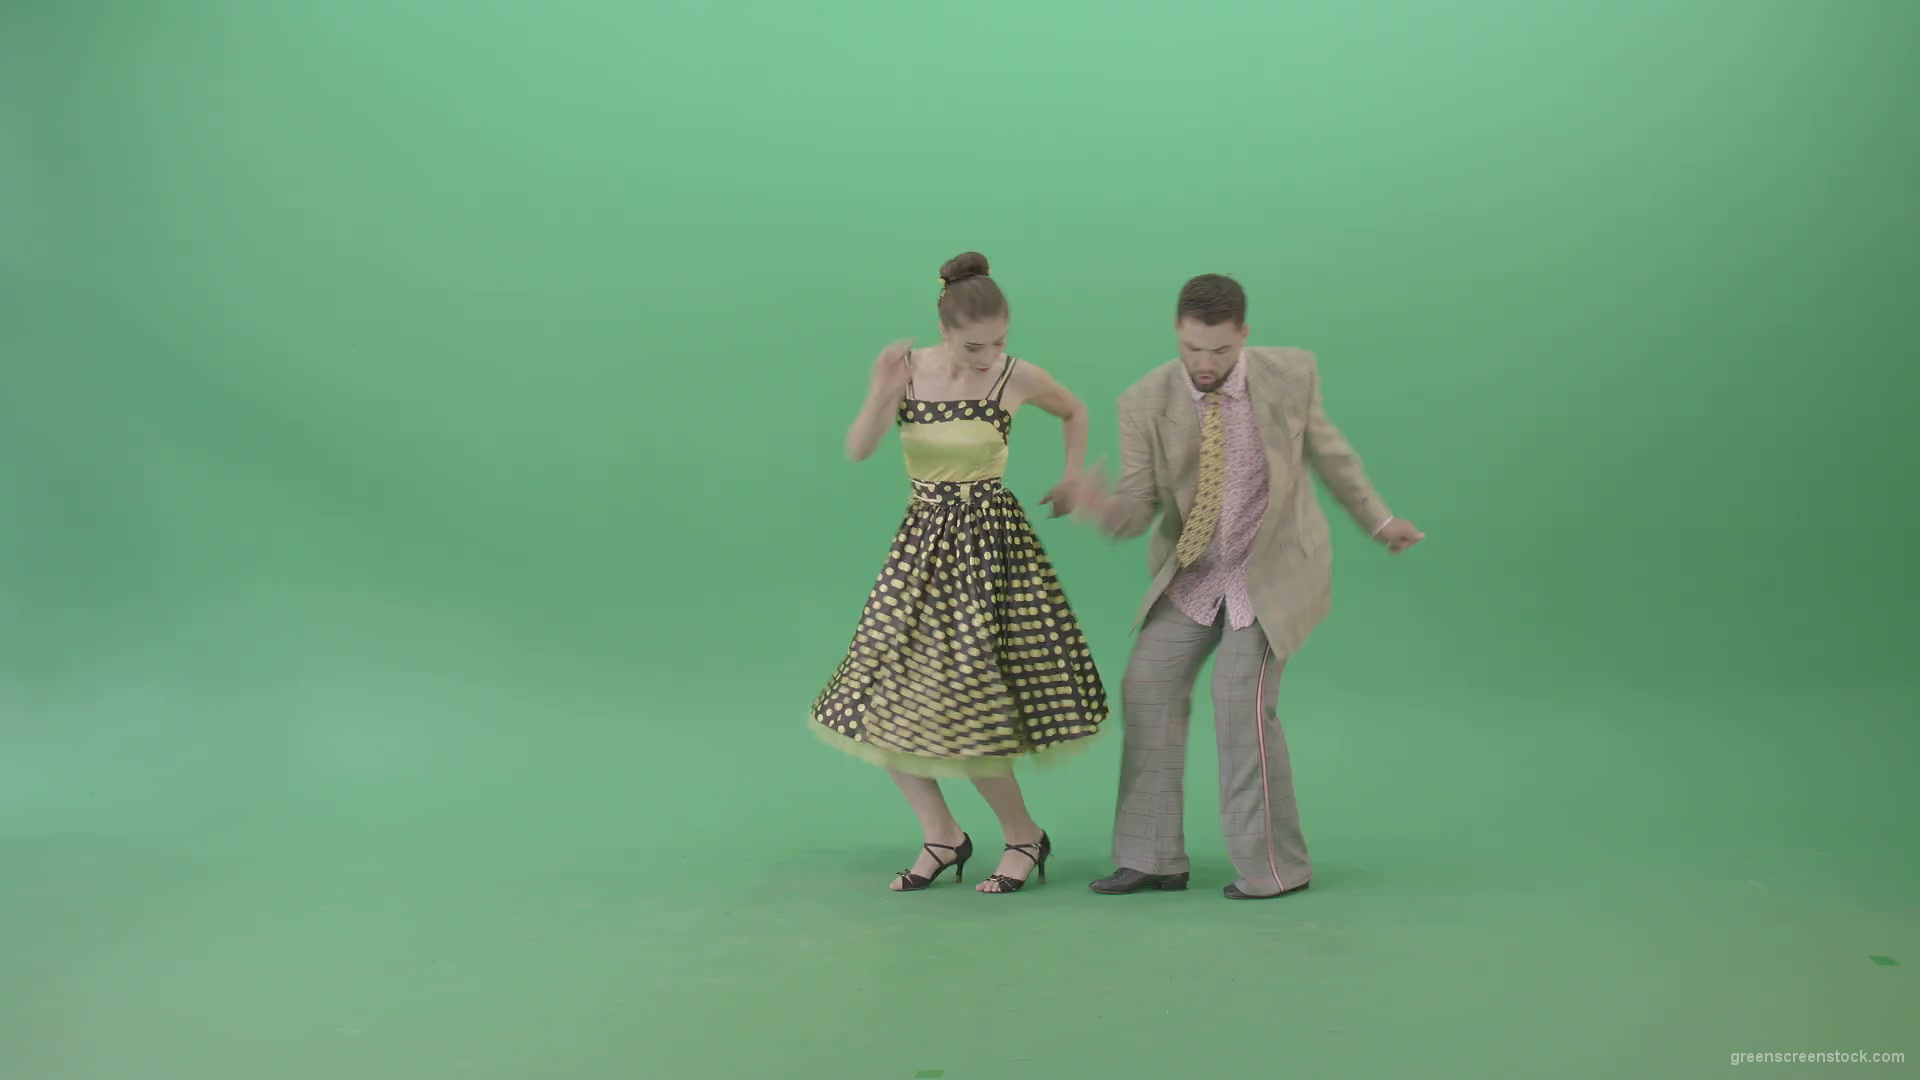 Happy-Man-and-woman-dancing-Boogie-woogie-moves-and-rock-and-roll-over-Green-Screen-4K-Video-Footage-1920_001 Green Screen Stock